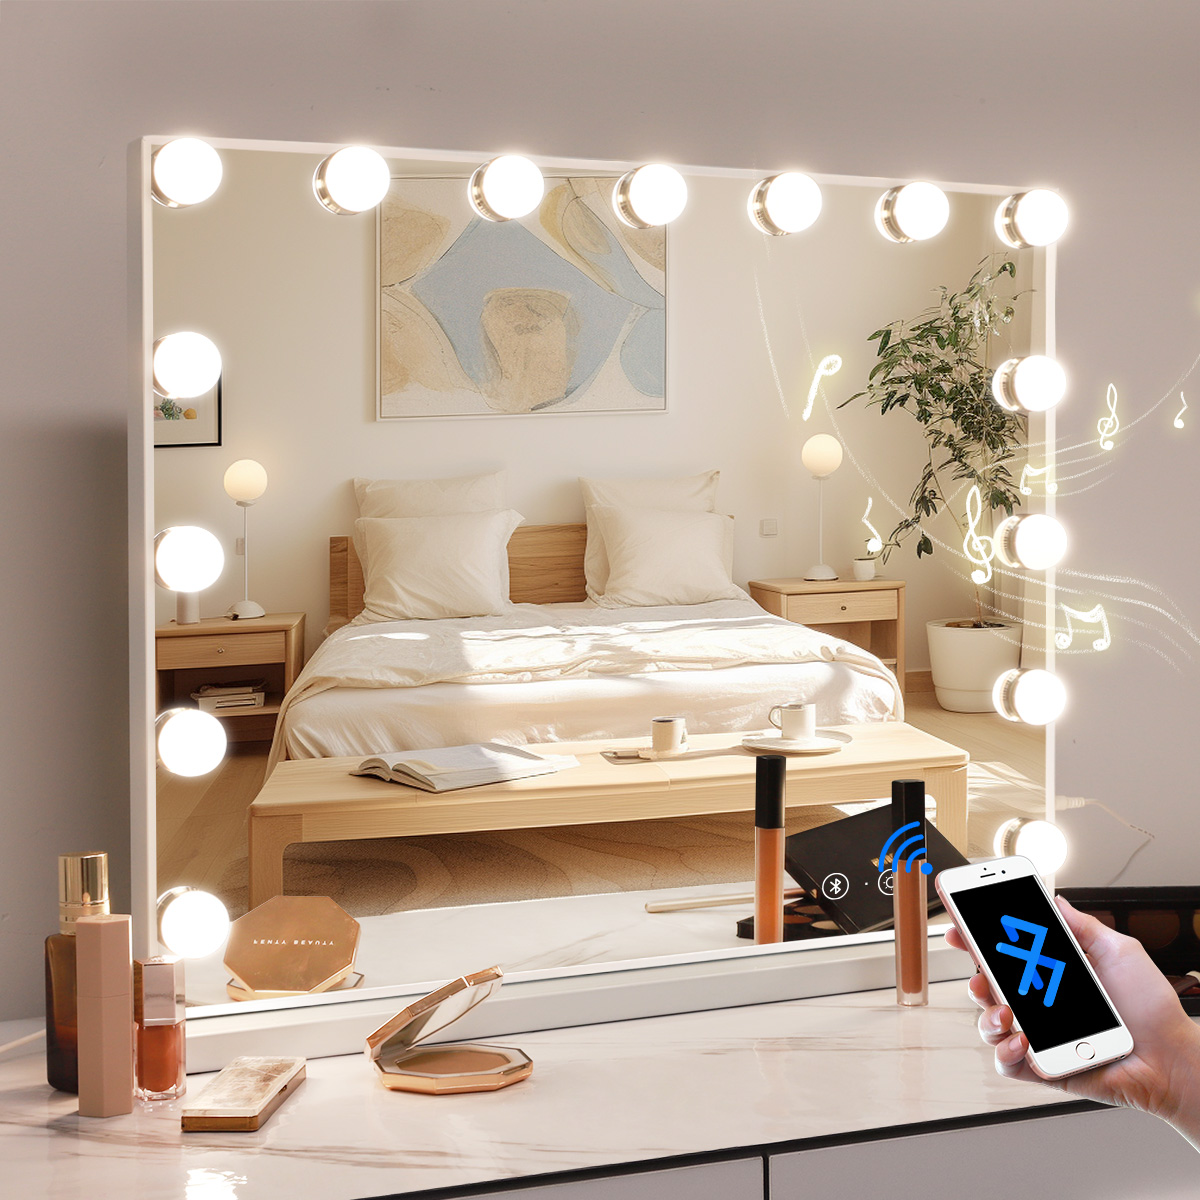 Fenchilin 23''x19'' Vanity Mirror with Lights Bluetooth Tabletop Wall Mount Metal White - image 1 of 12